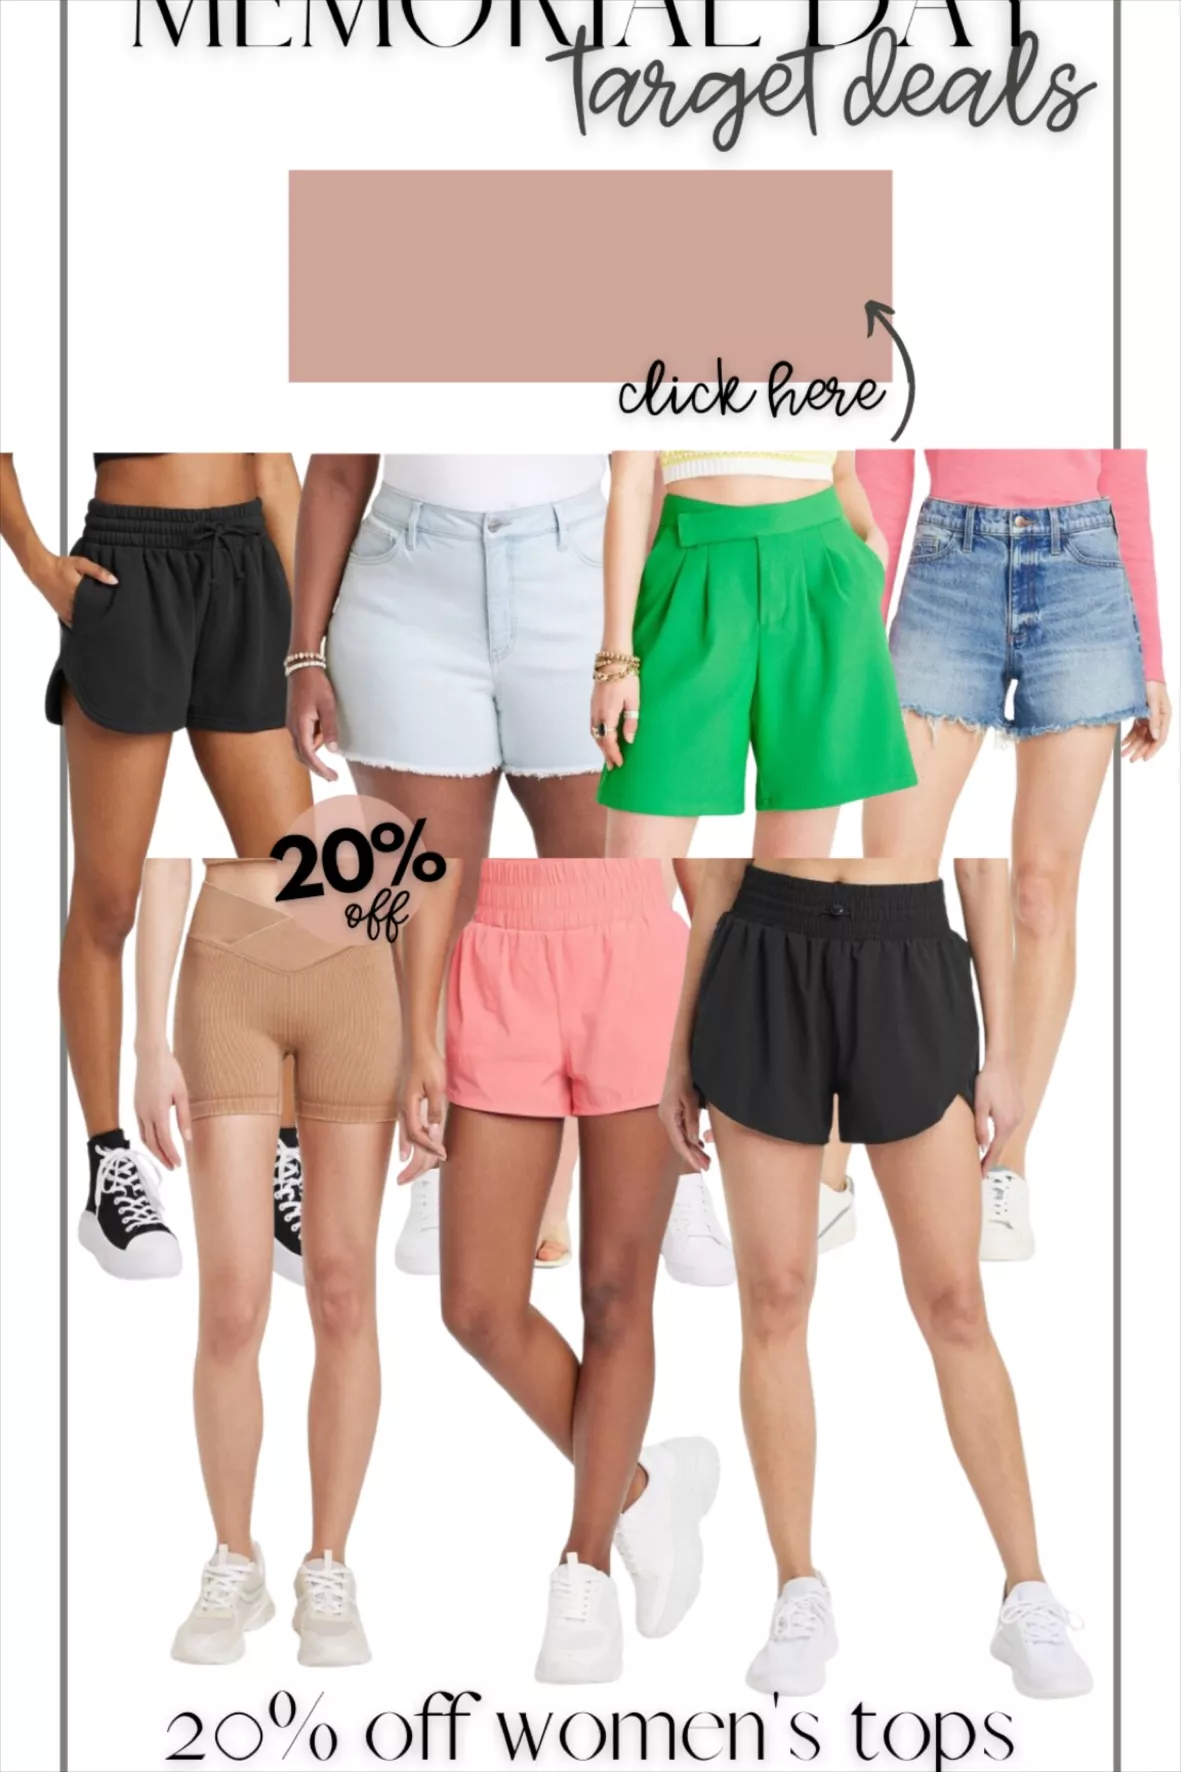 Women's High-Rise Flex Shorts 3 - … curated on LTK